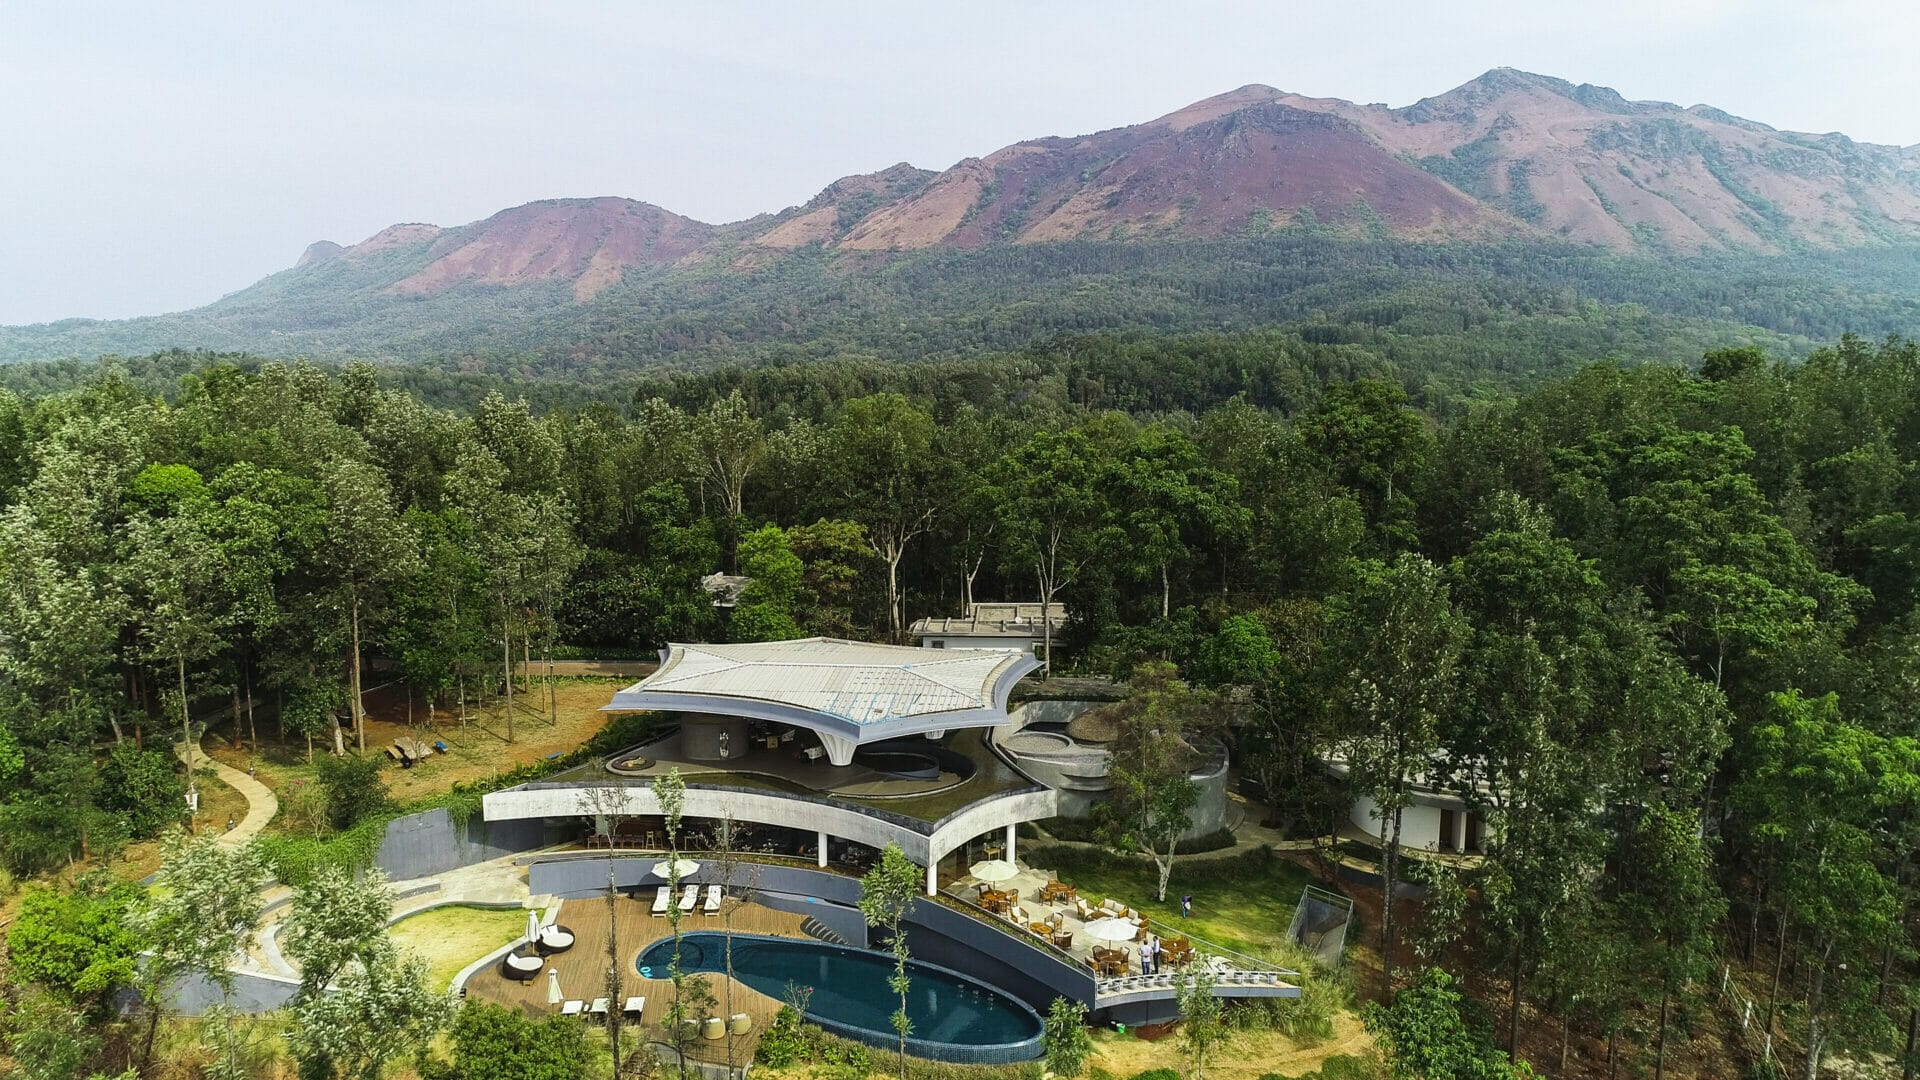 The Java Rain Resort by Cadence architects diffuses the notion of formal villas